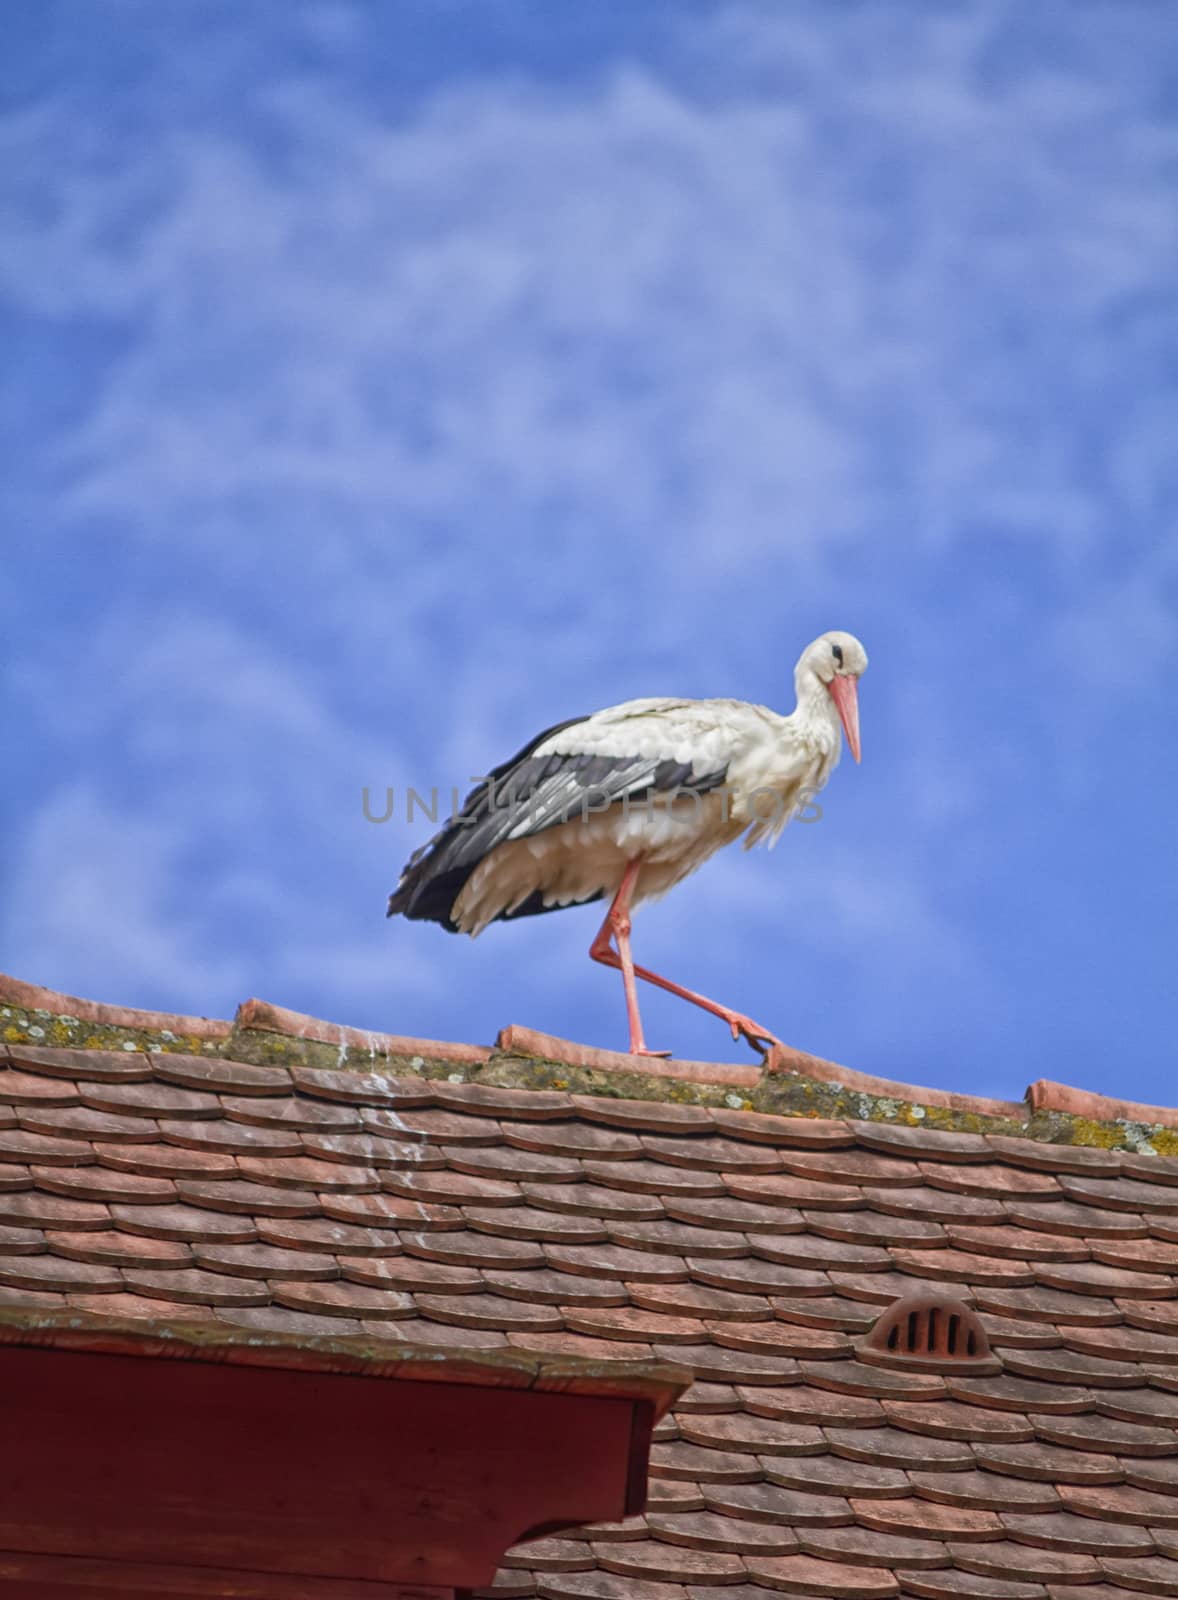 Stork walking on a roof and sky blue